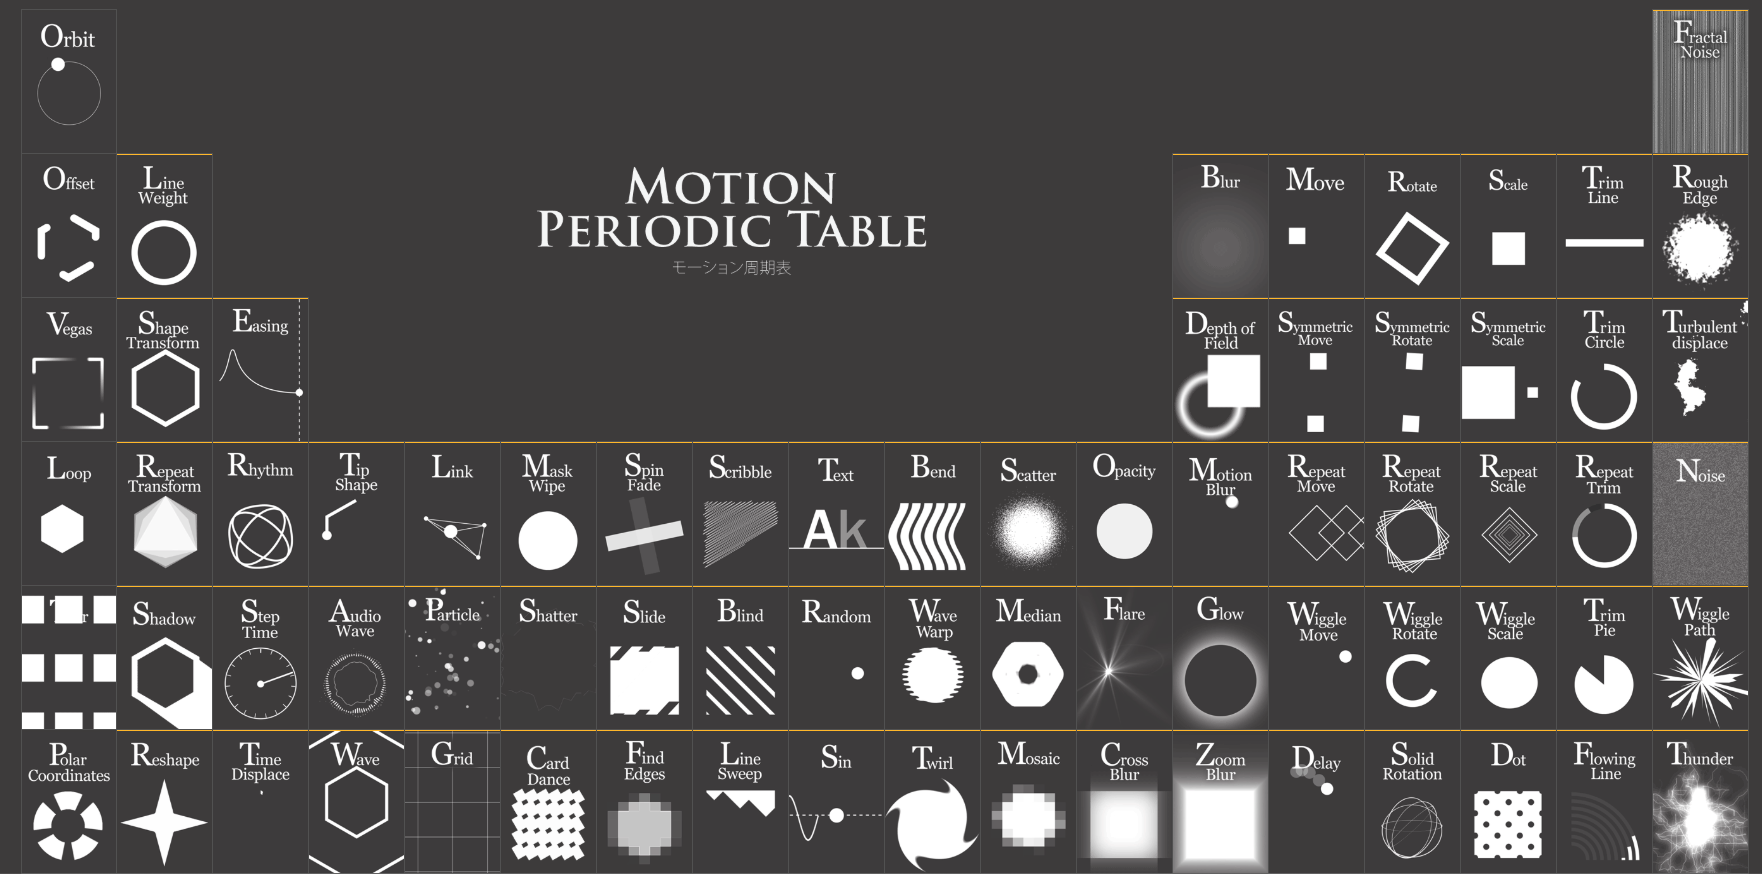 Motion Periodic Table